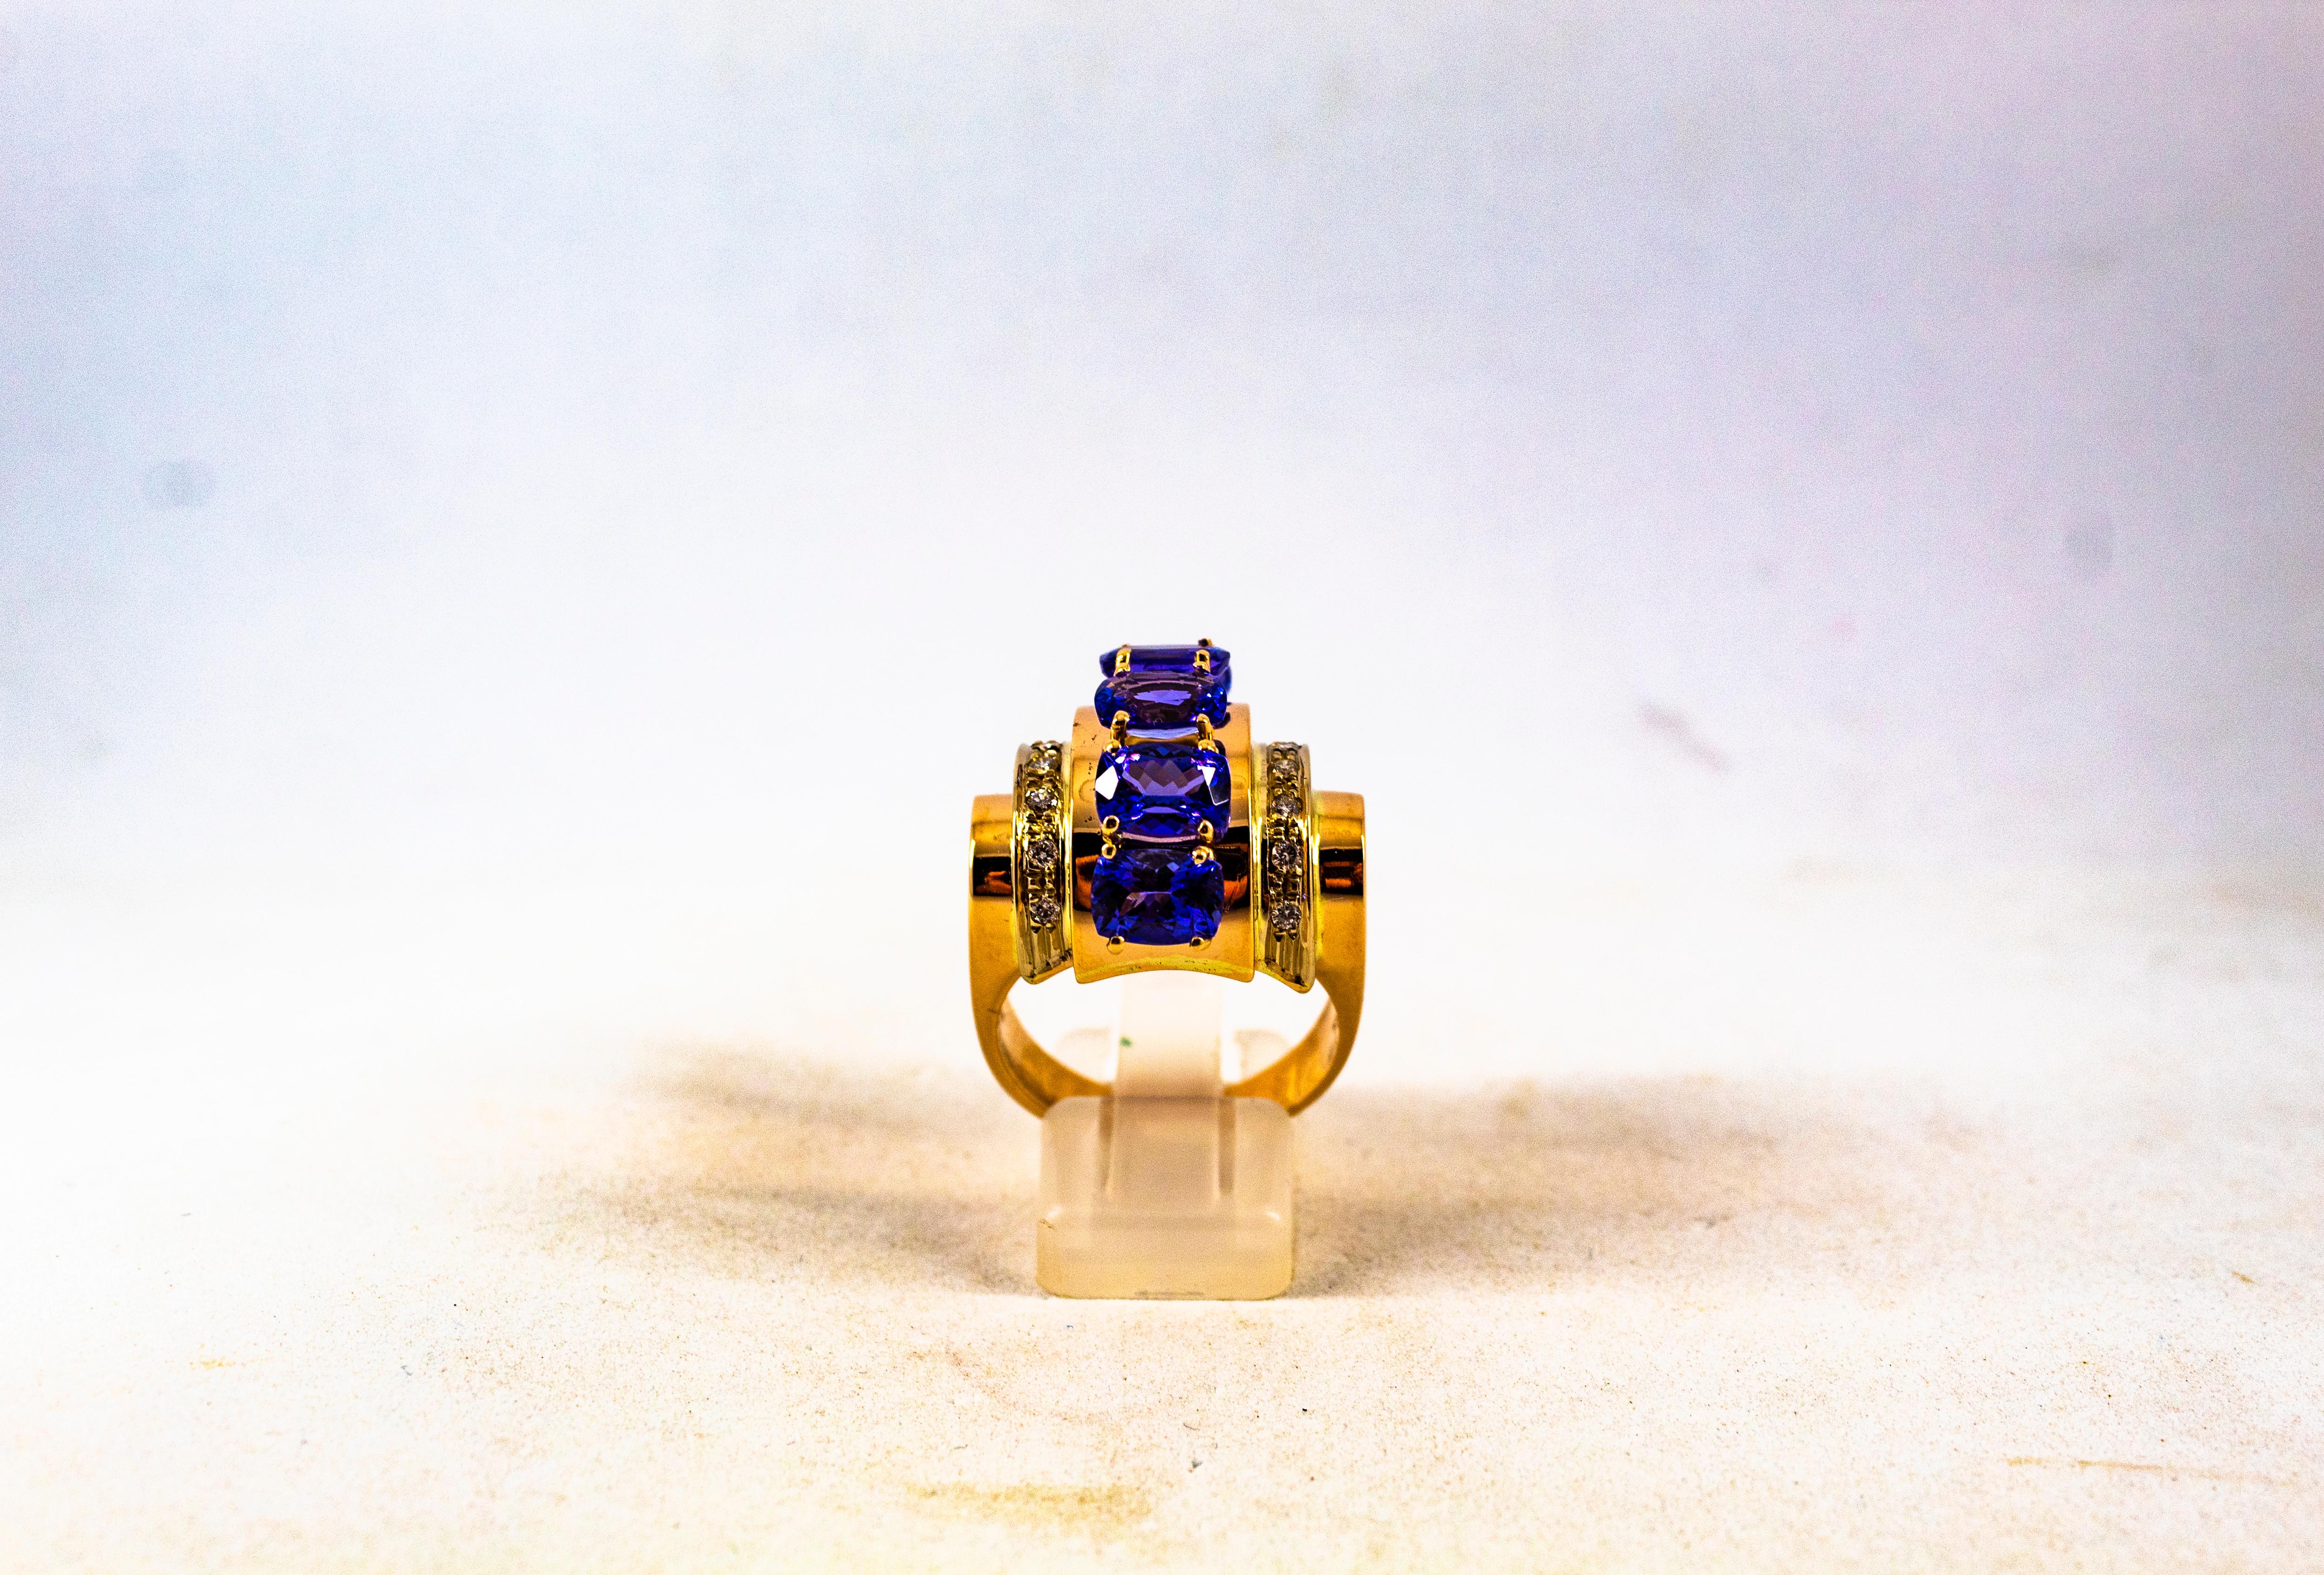 This Ring is made of 14K Yellow Gold.
This Ring has 0.30 Carats of White Brilliant Cut Diamonds.
This Ring has 5.30 Carats of Natural Cushion Cut Tanzanites.
This Ring is available also with Rubies, Emeralds or Blue Sapphires.
Size ITA: 19 USA: 8